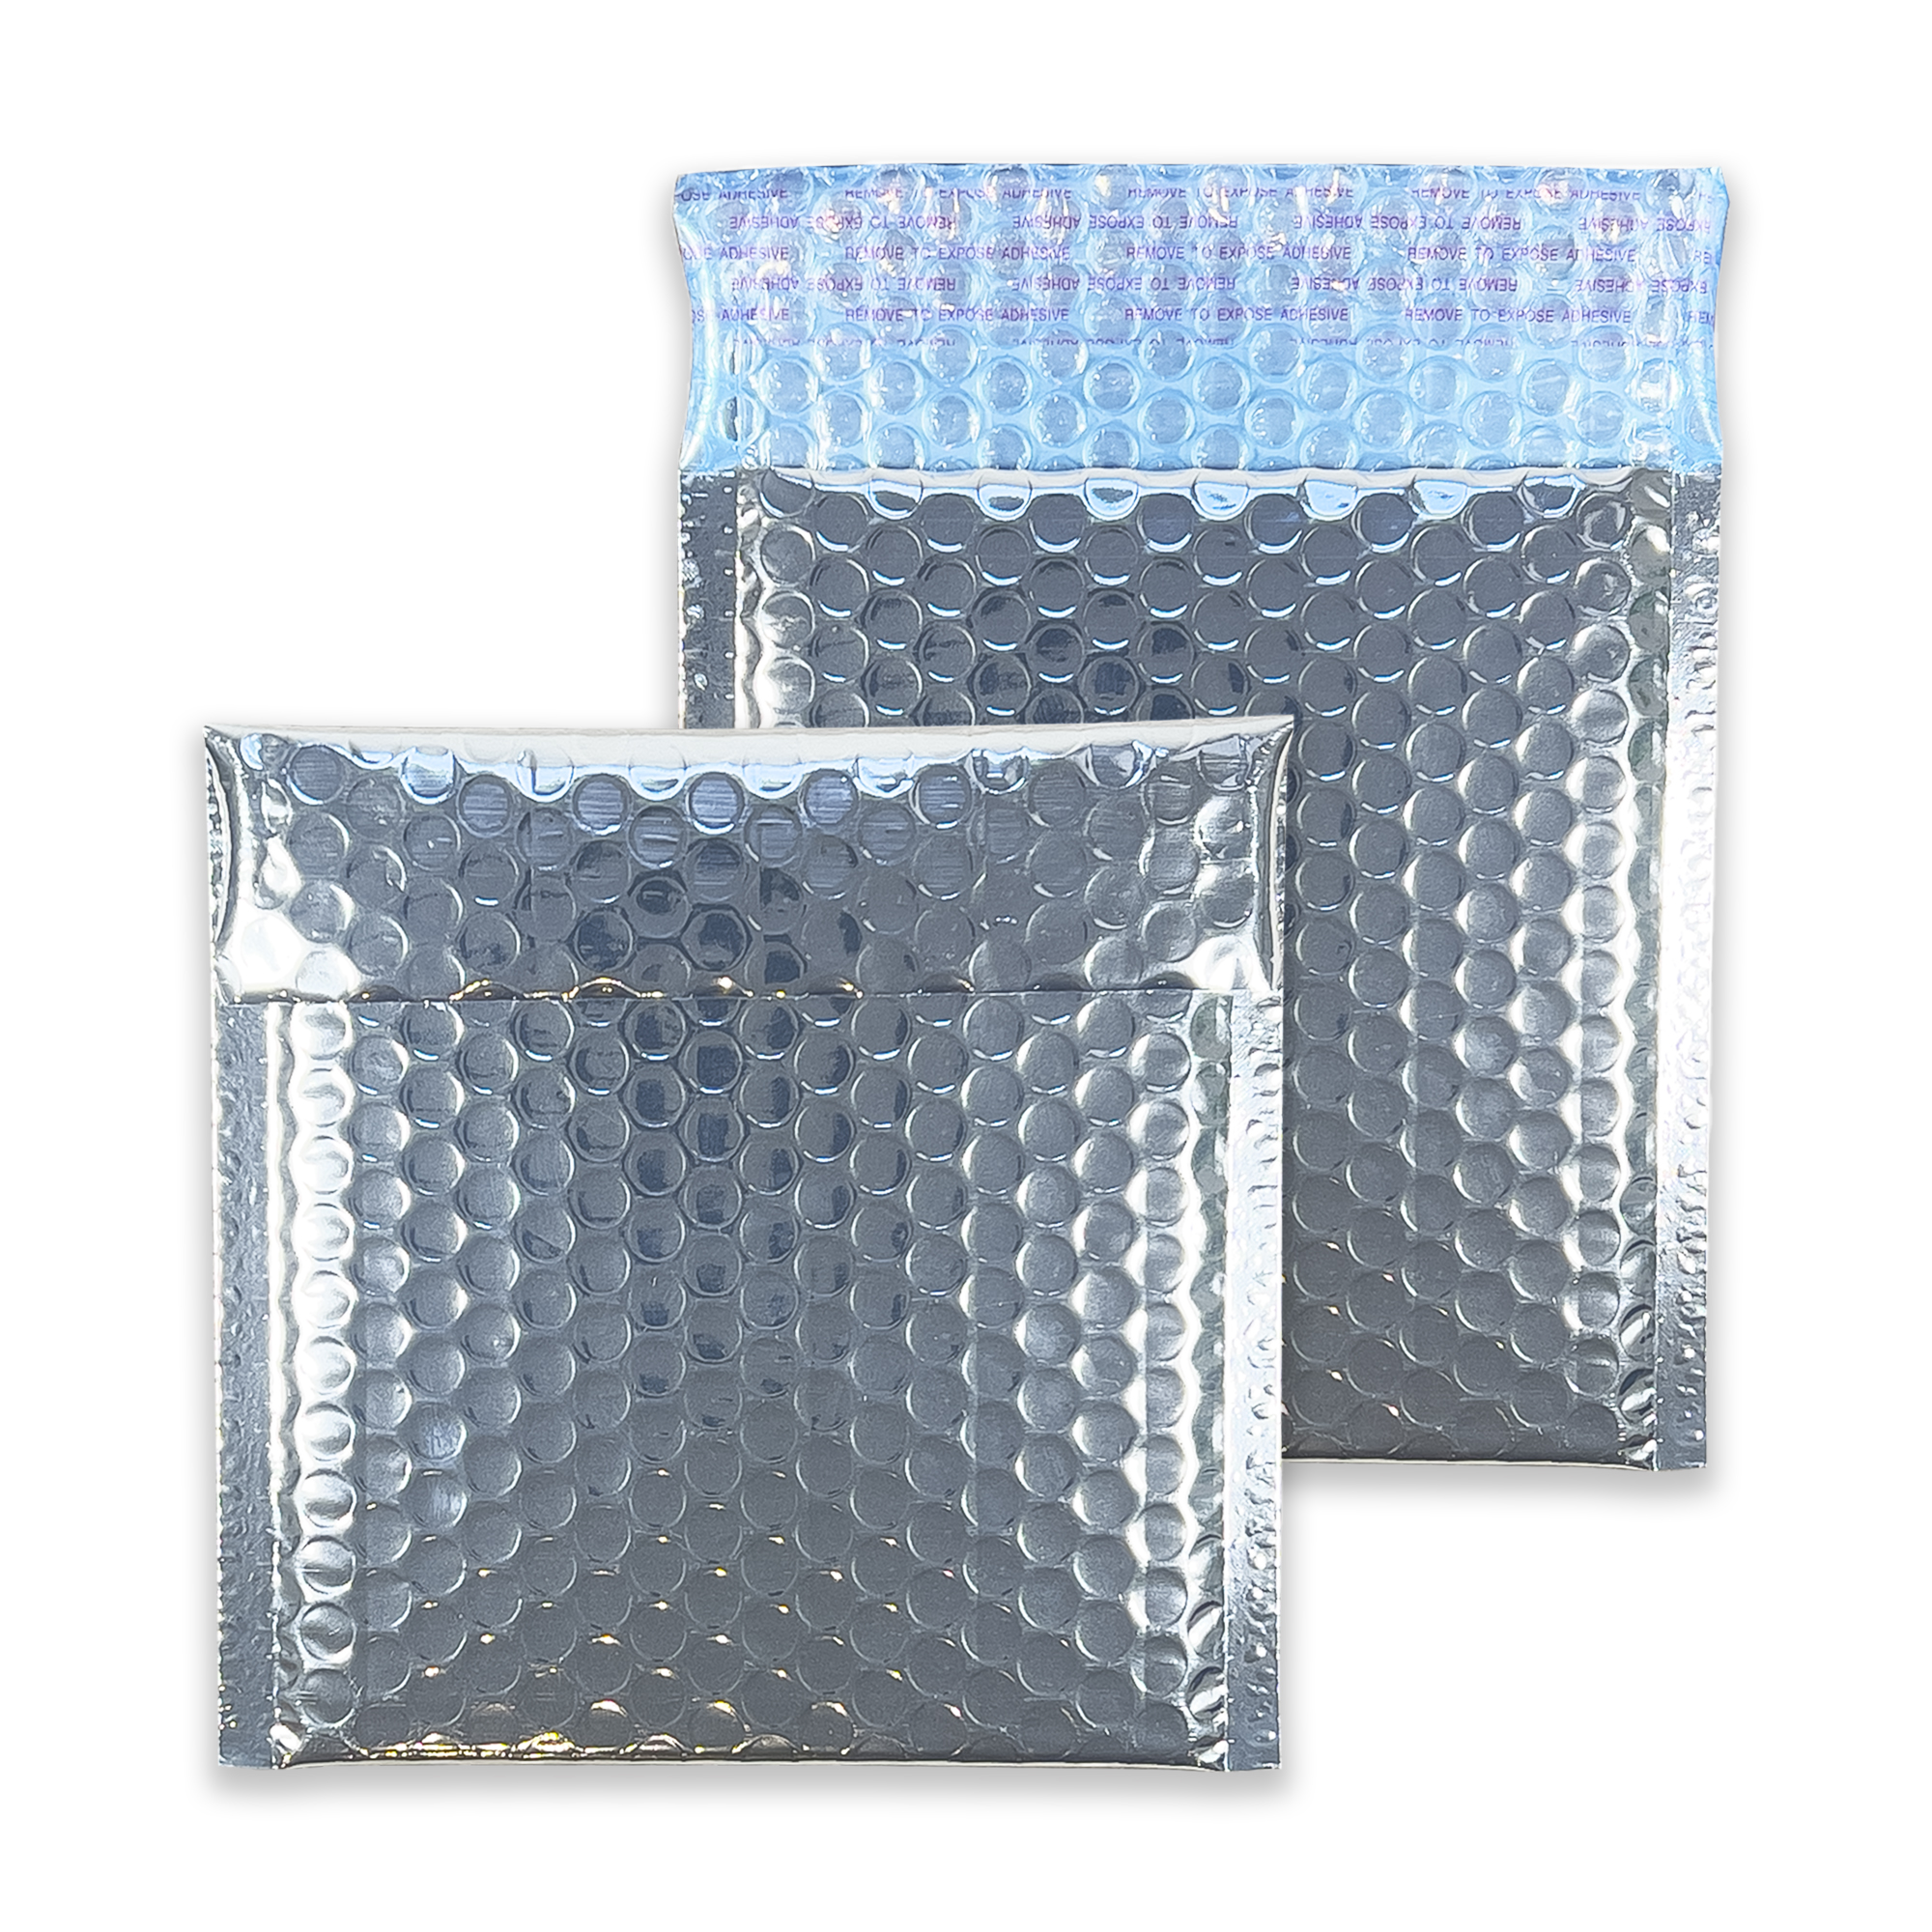 metallic-silver-bubble-padded-envelopes-165×165-together